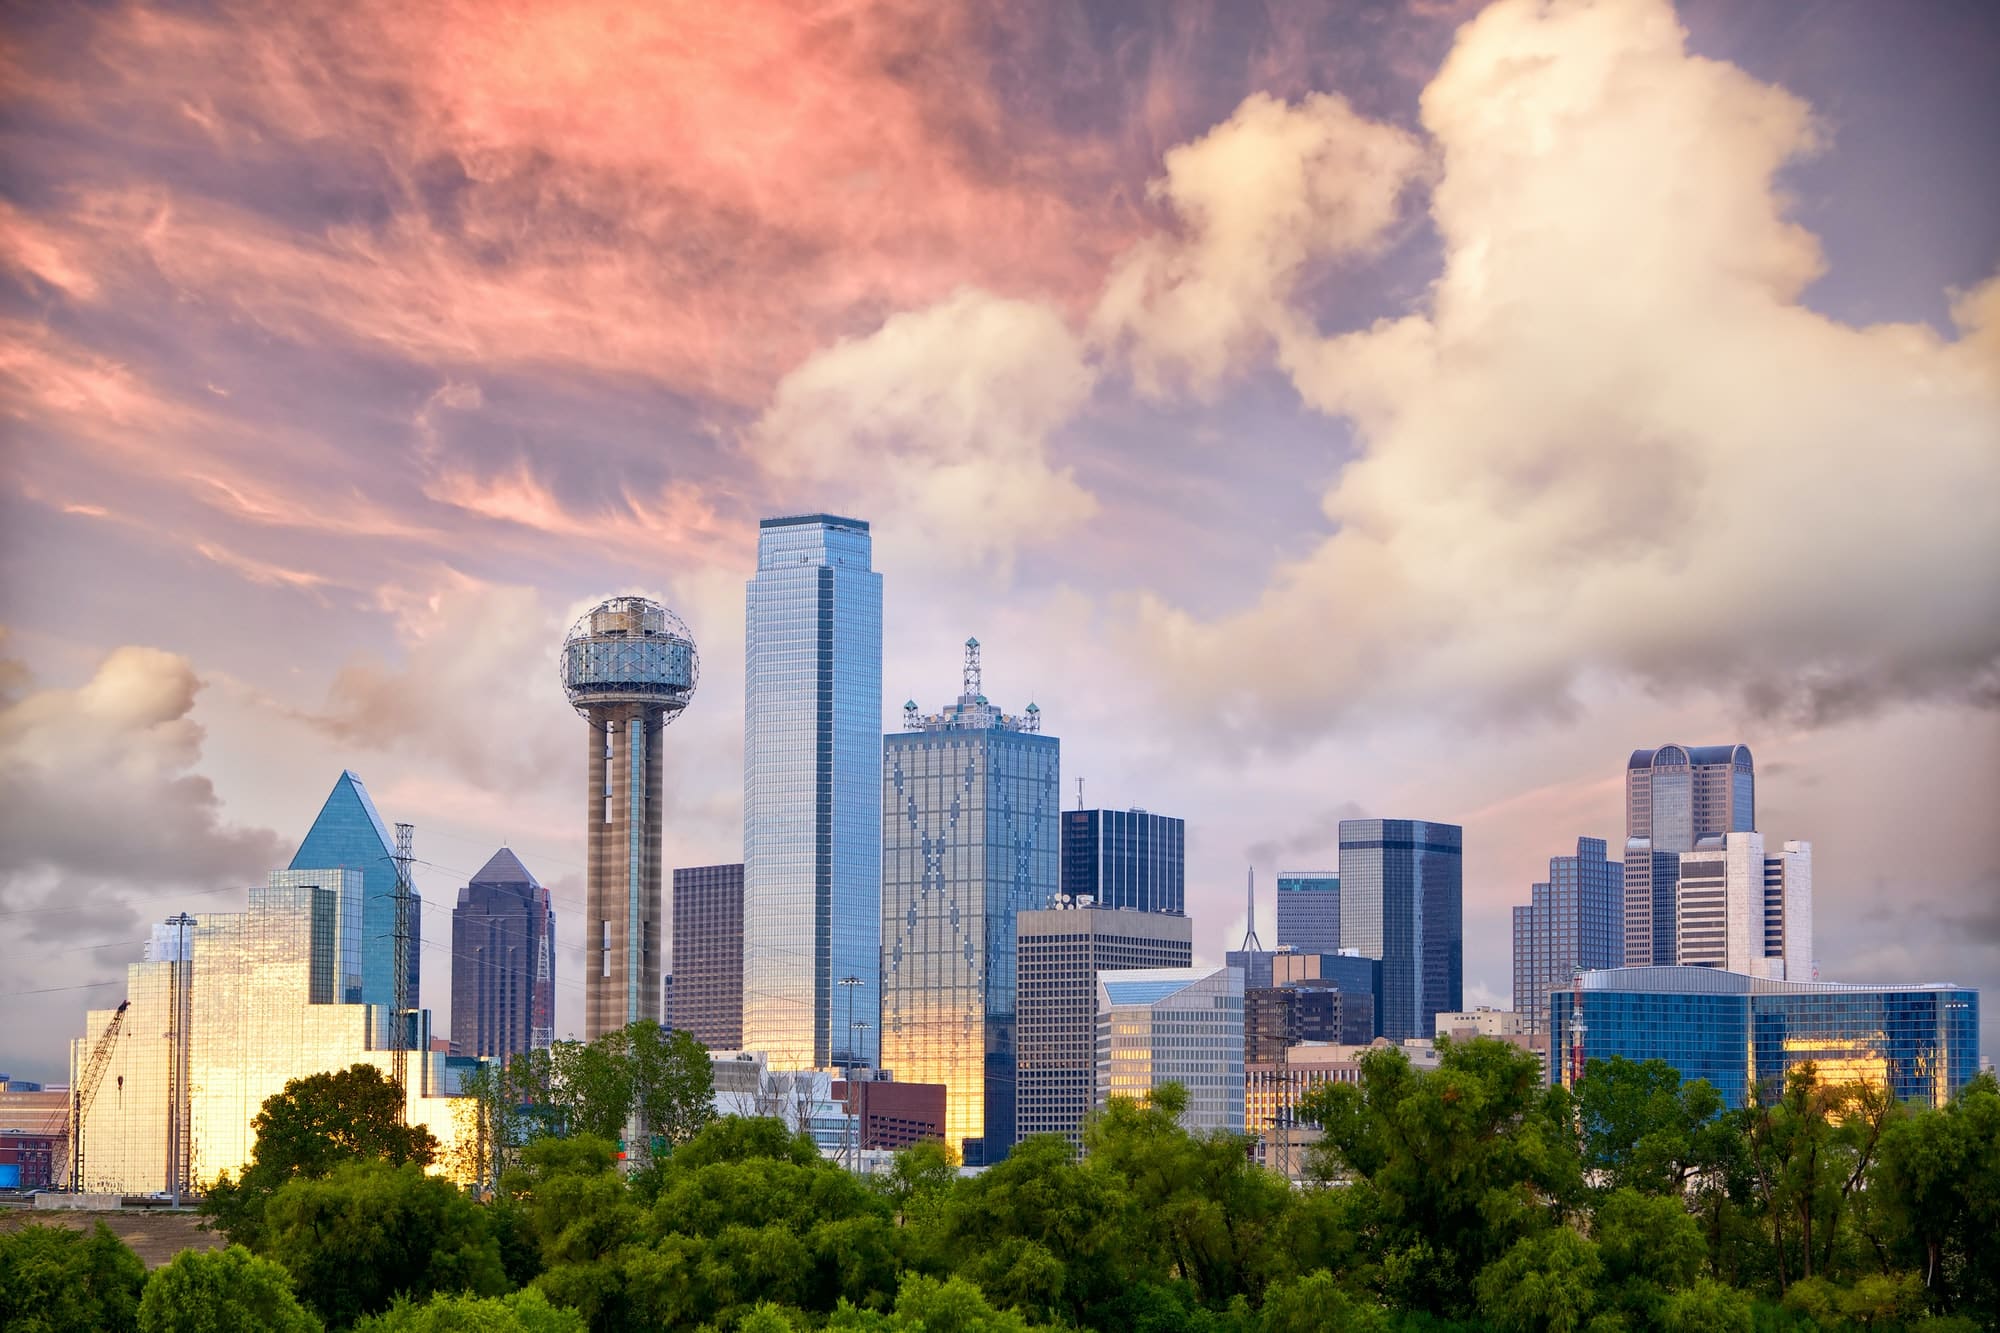 Little Known Things about Dallas: A Trip to Texas worth Remembering